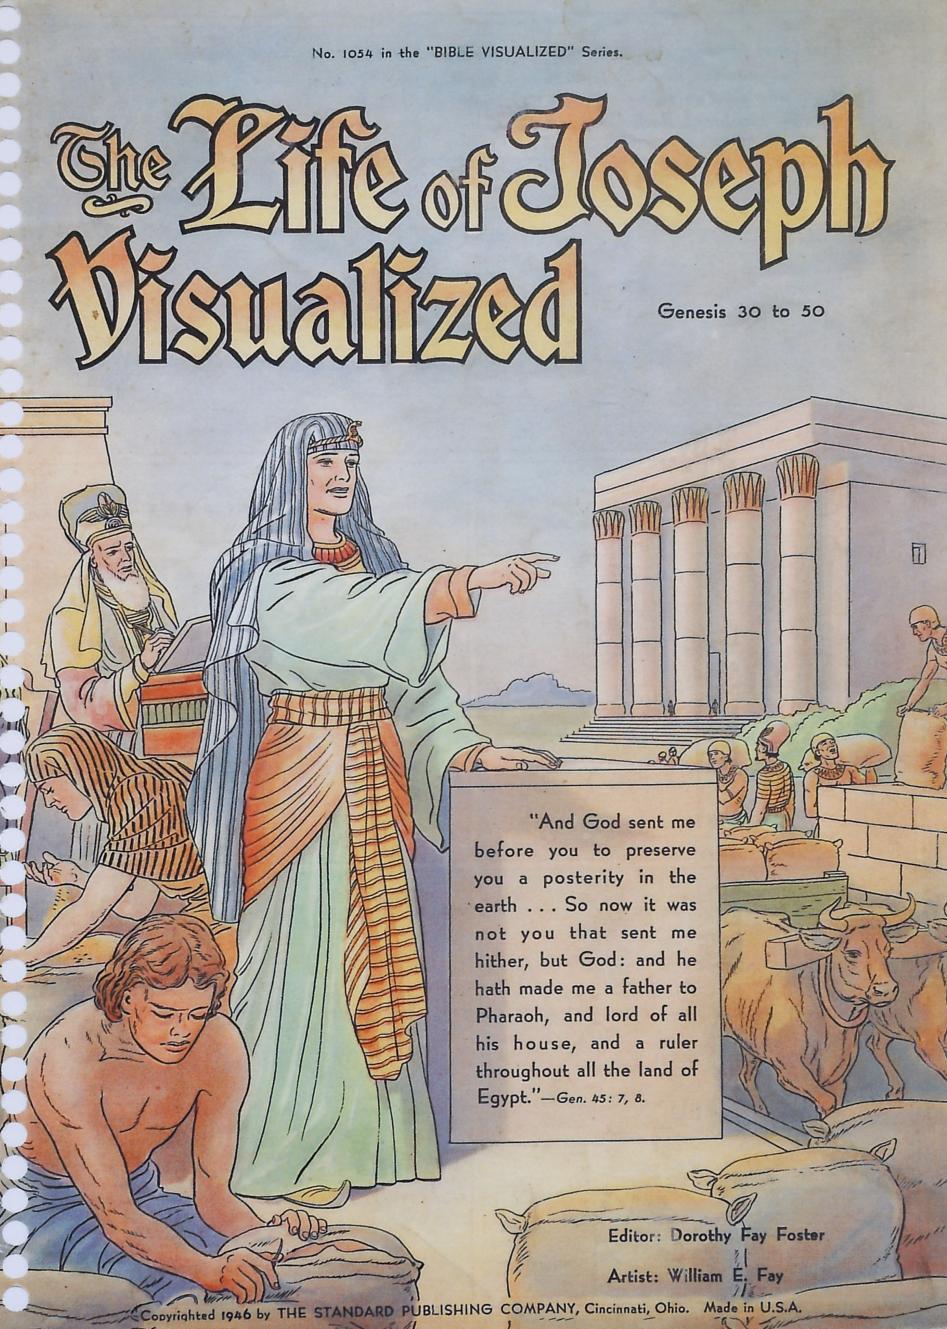 Book Cover For The Life of Joseph Visualized